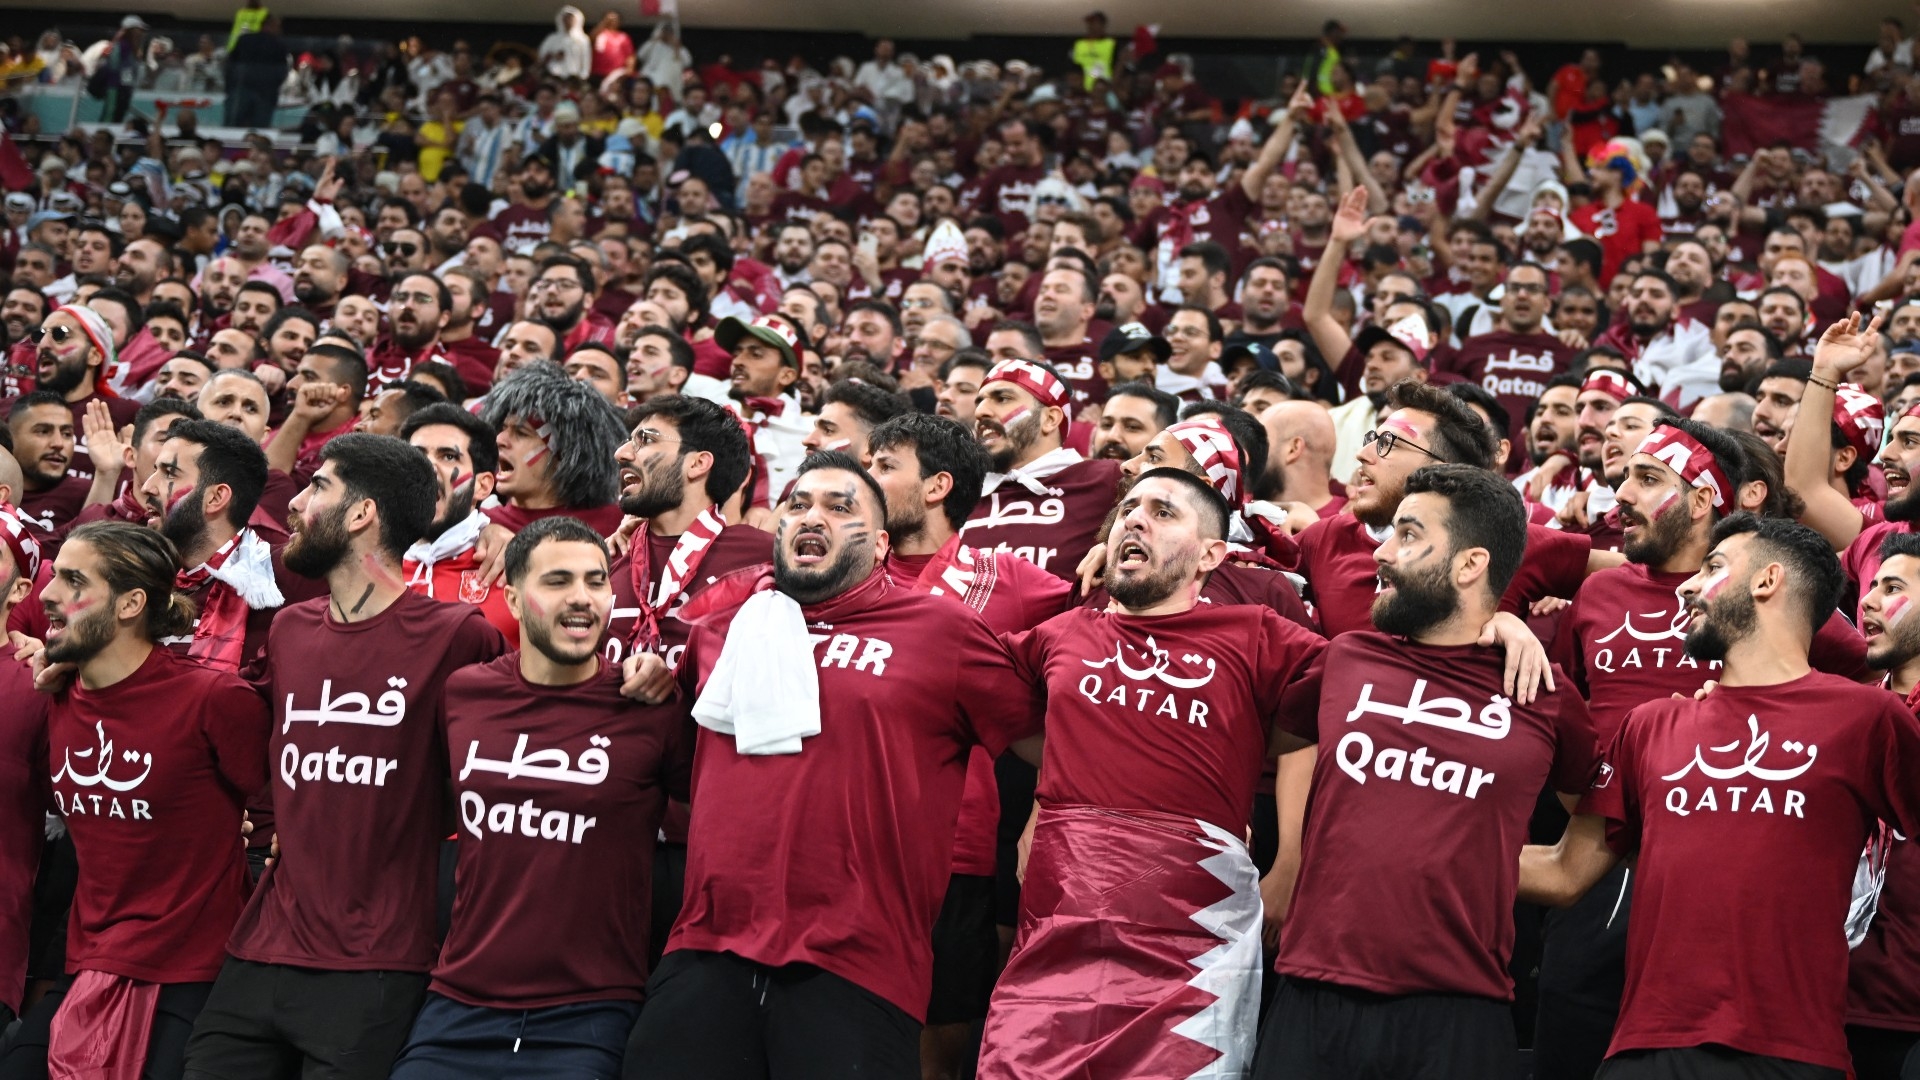 FIFA World Cup 2022 Qatar: Many firsts in this FIFA edition  FIFA World Cup  2022 Qatar vs Ecuador squad, schedule dates, opening ceremony time, teams,  broadcast in India, Qatar stadiums, tickets